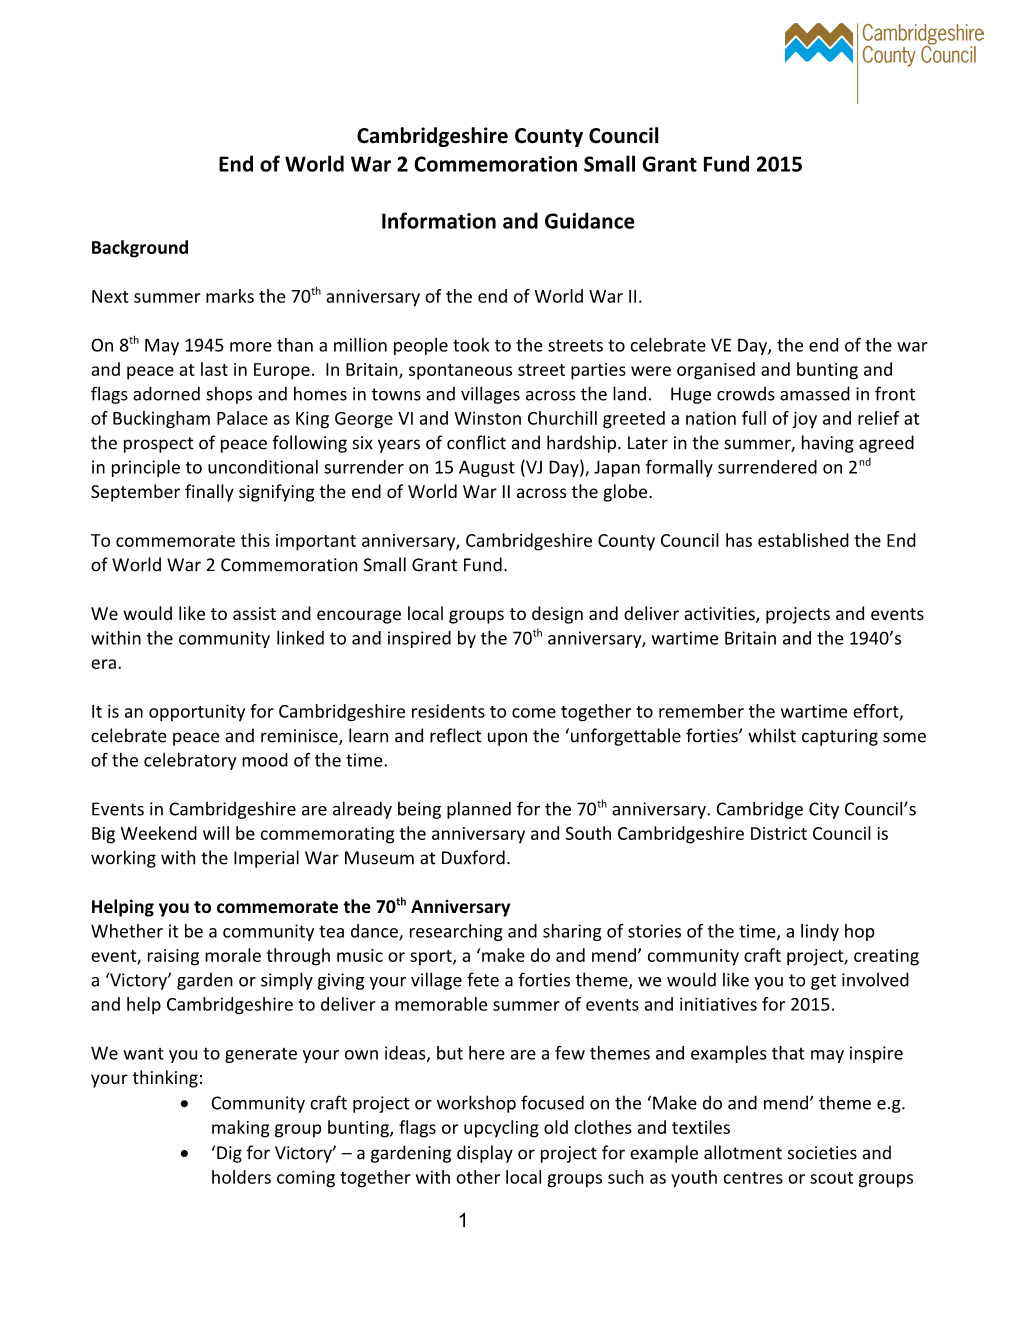 End of World War 2 Commemoration Small Grant Fund 2015